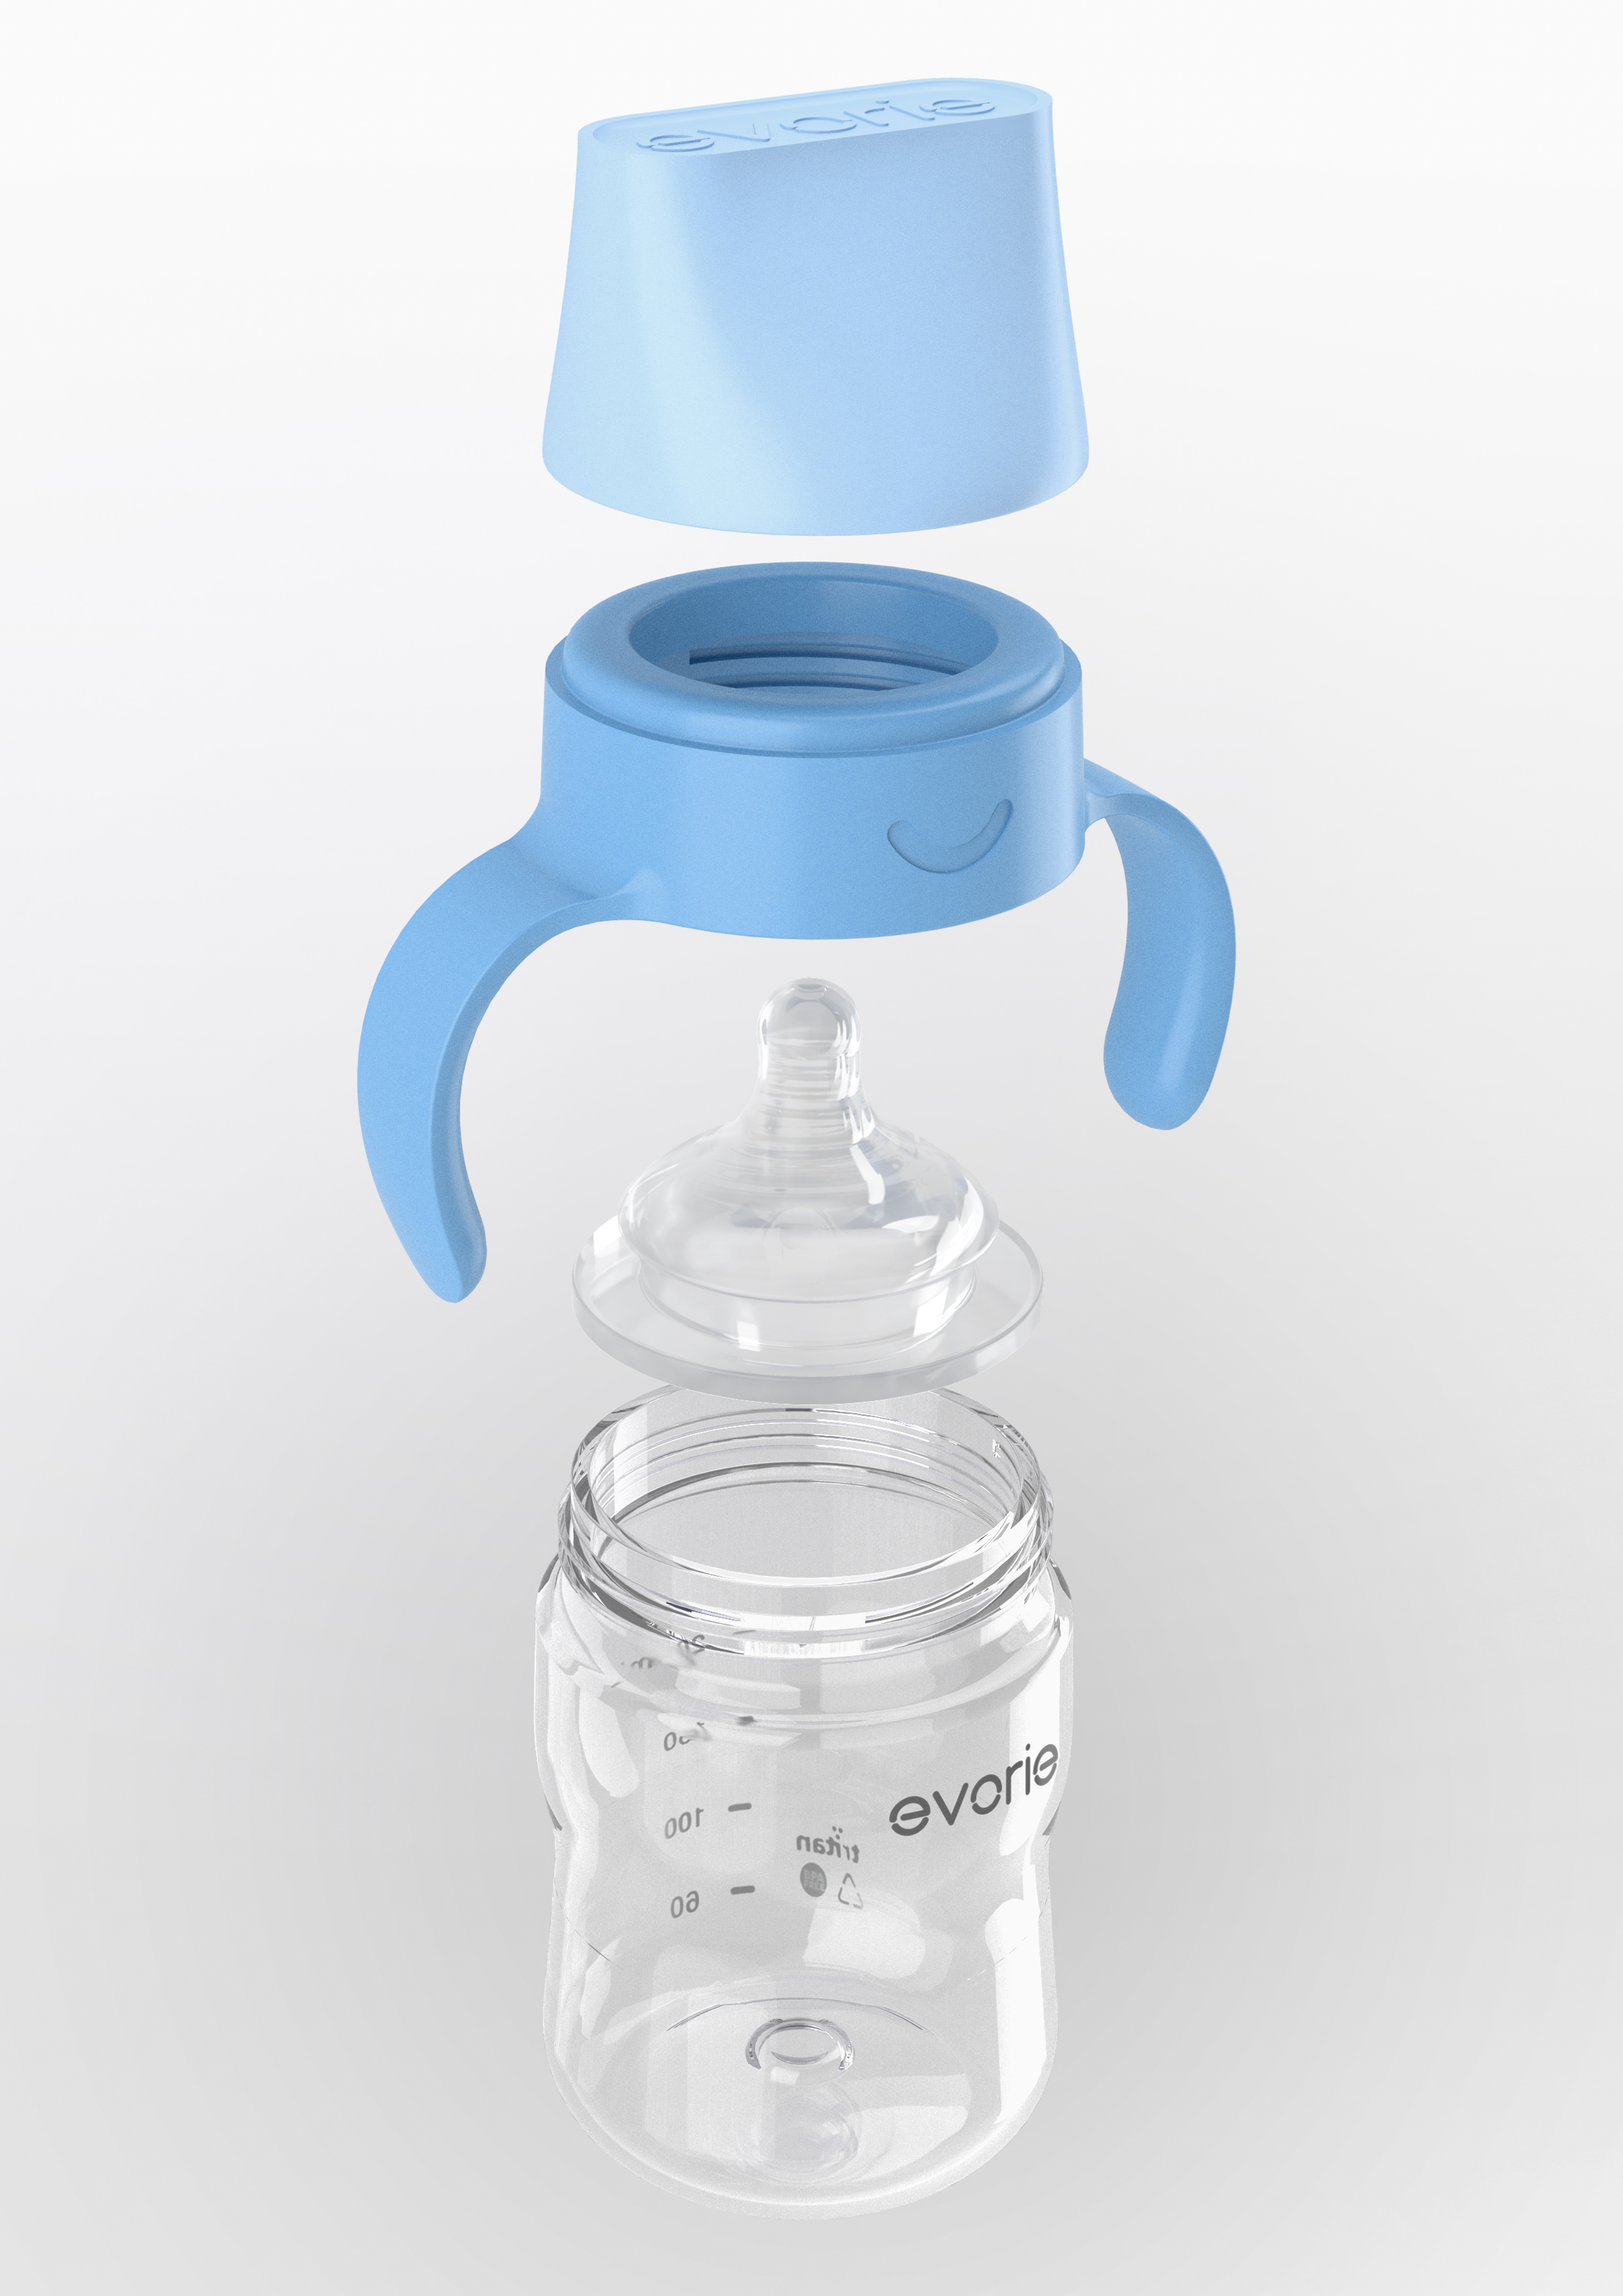 https://cdn.yournet.space/good-design.org/2020/Product%20Design/Sport%20and%20Lifestyle/3172-Evorie%20toddler%20water%20bottles/Evorie%20toddler%20water%20bottles-7.jpg